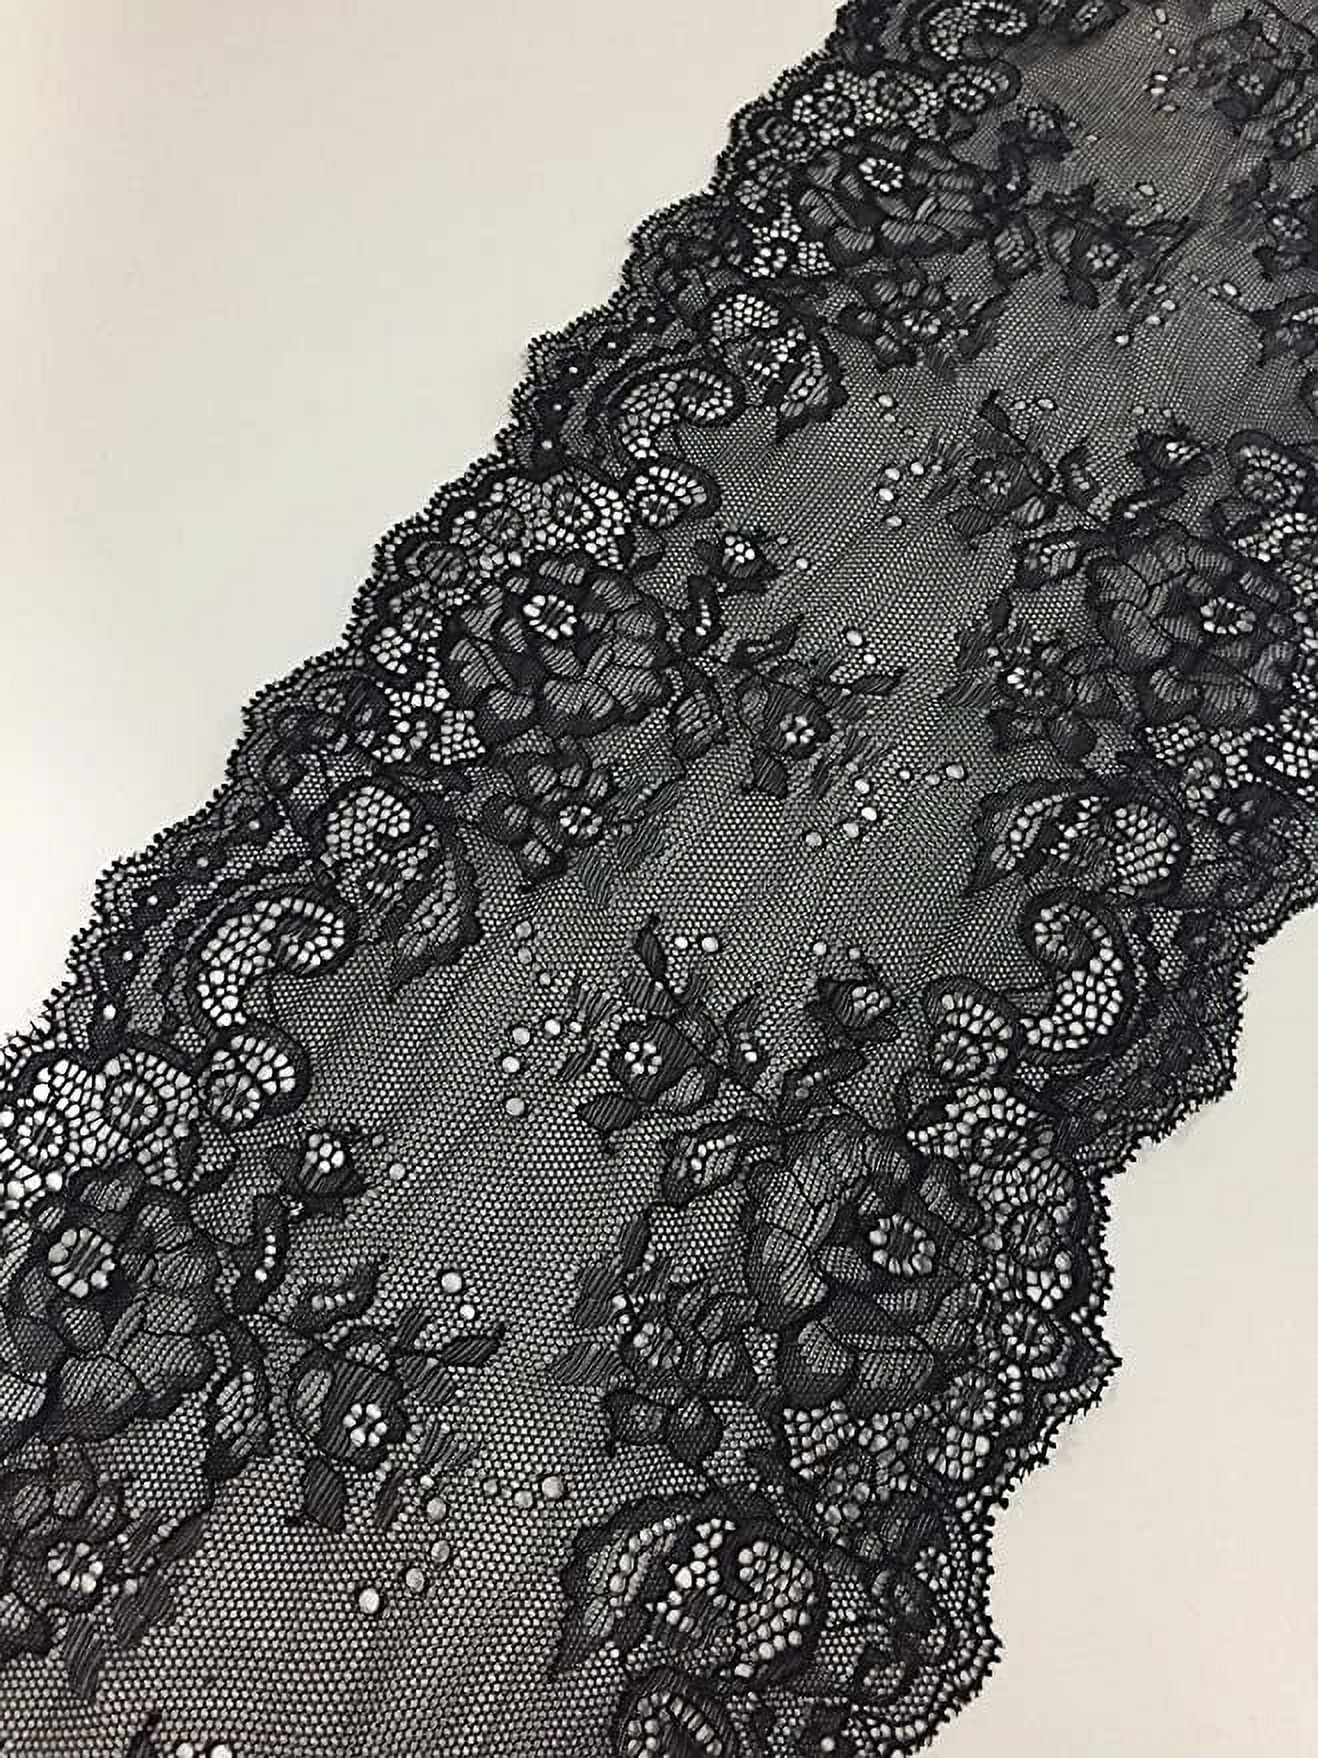 Black Lace Fabric Lace Trim, Stretch Floral Lace Ribbon Trim, Wide Elastic Sewing Lace Crafts Decorating (Black 7inch 5Yards)